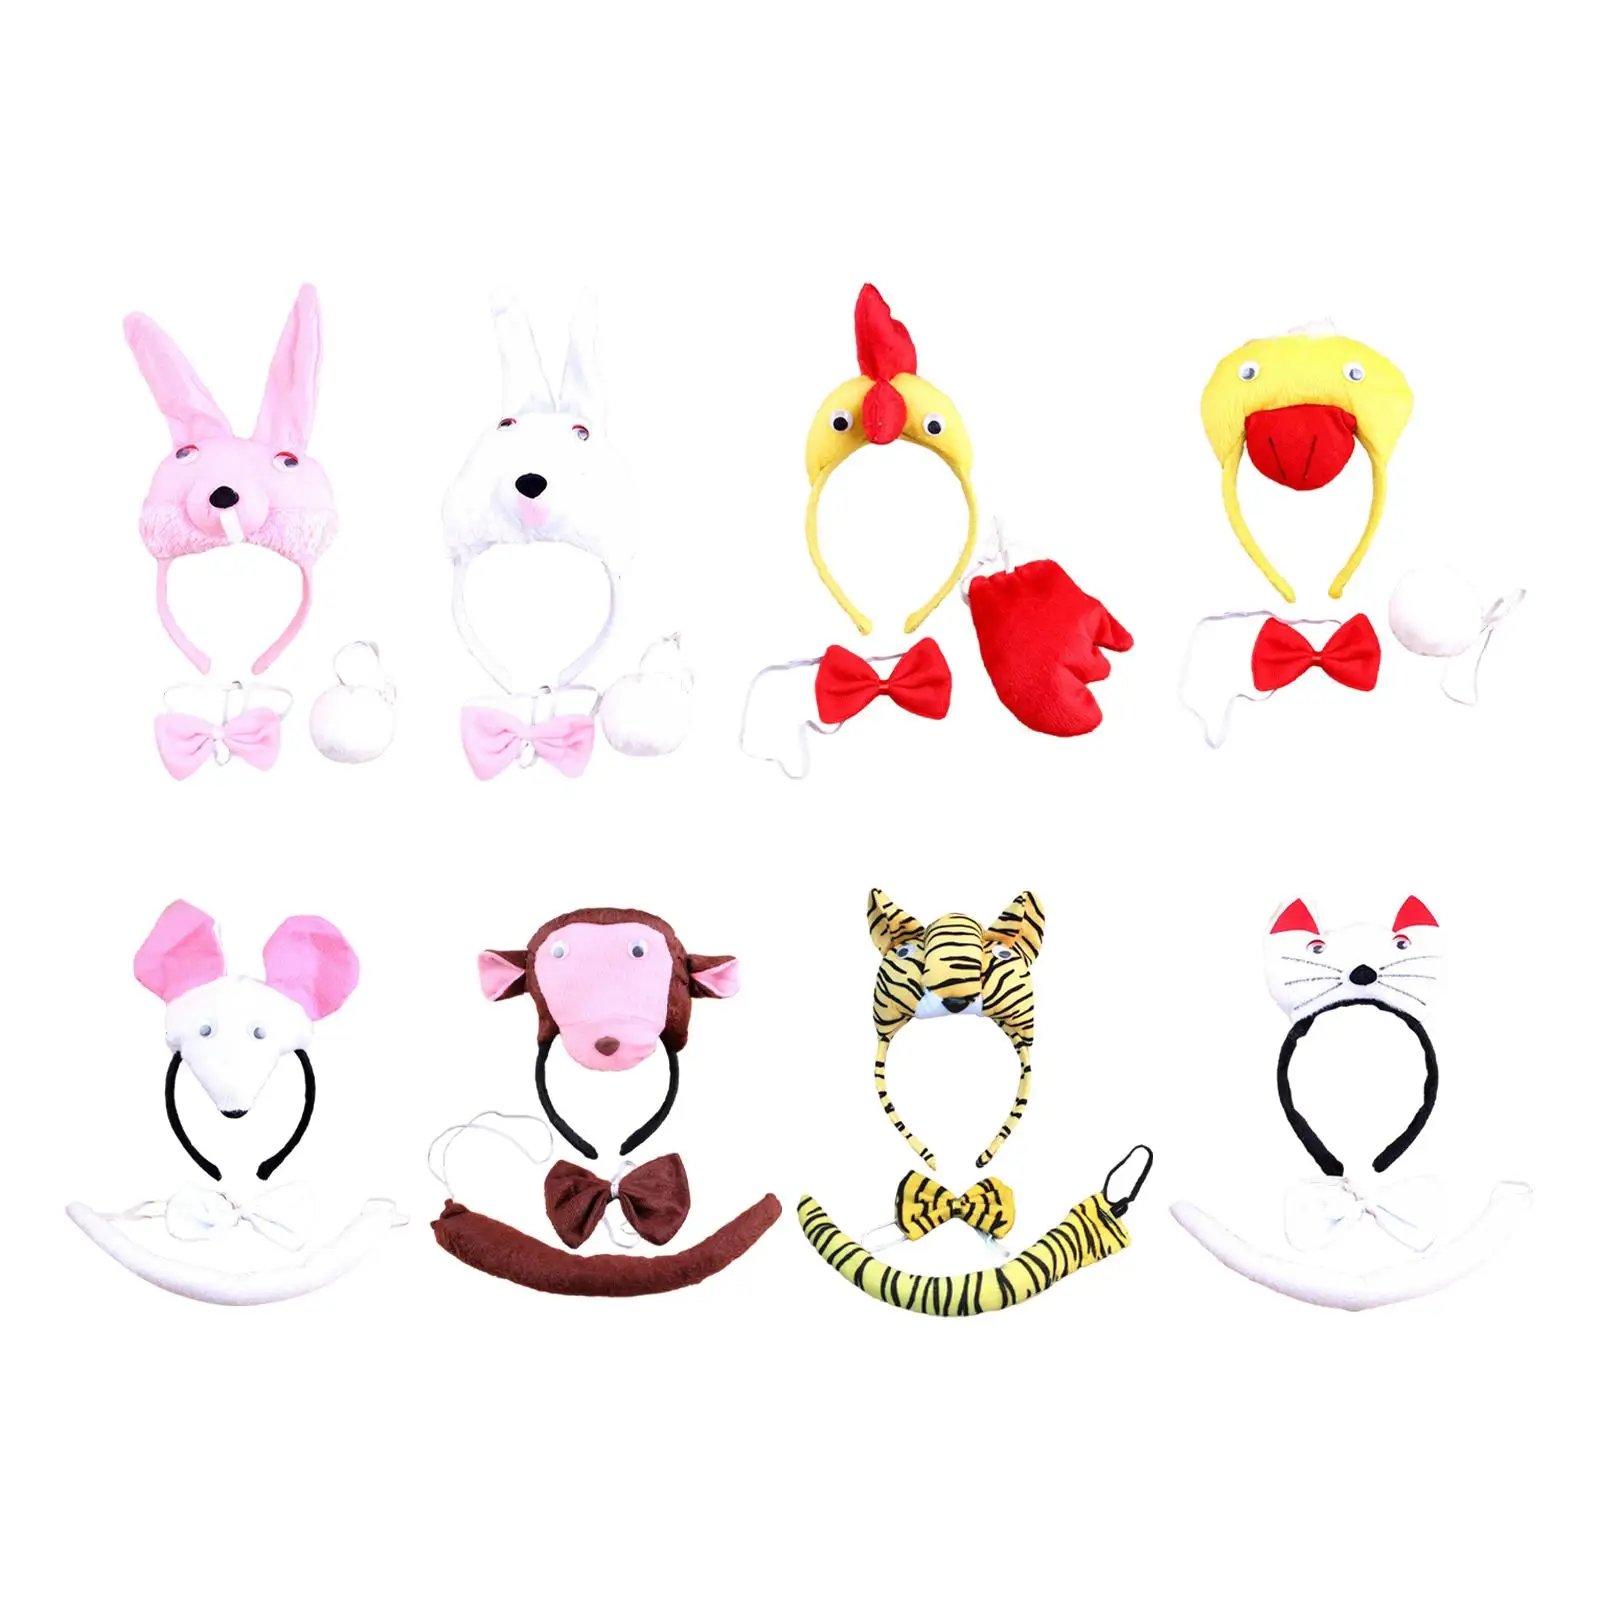 Animal Headband Tail Bowtie Set Dress up Funny Gifts Hairband Costume Accessory Kit for Masquerade Halloween Party Prom Carnival